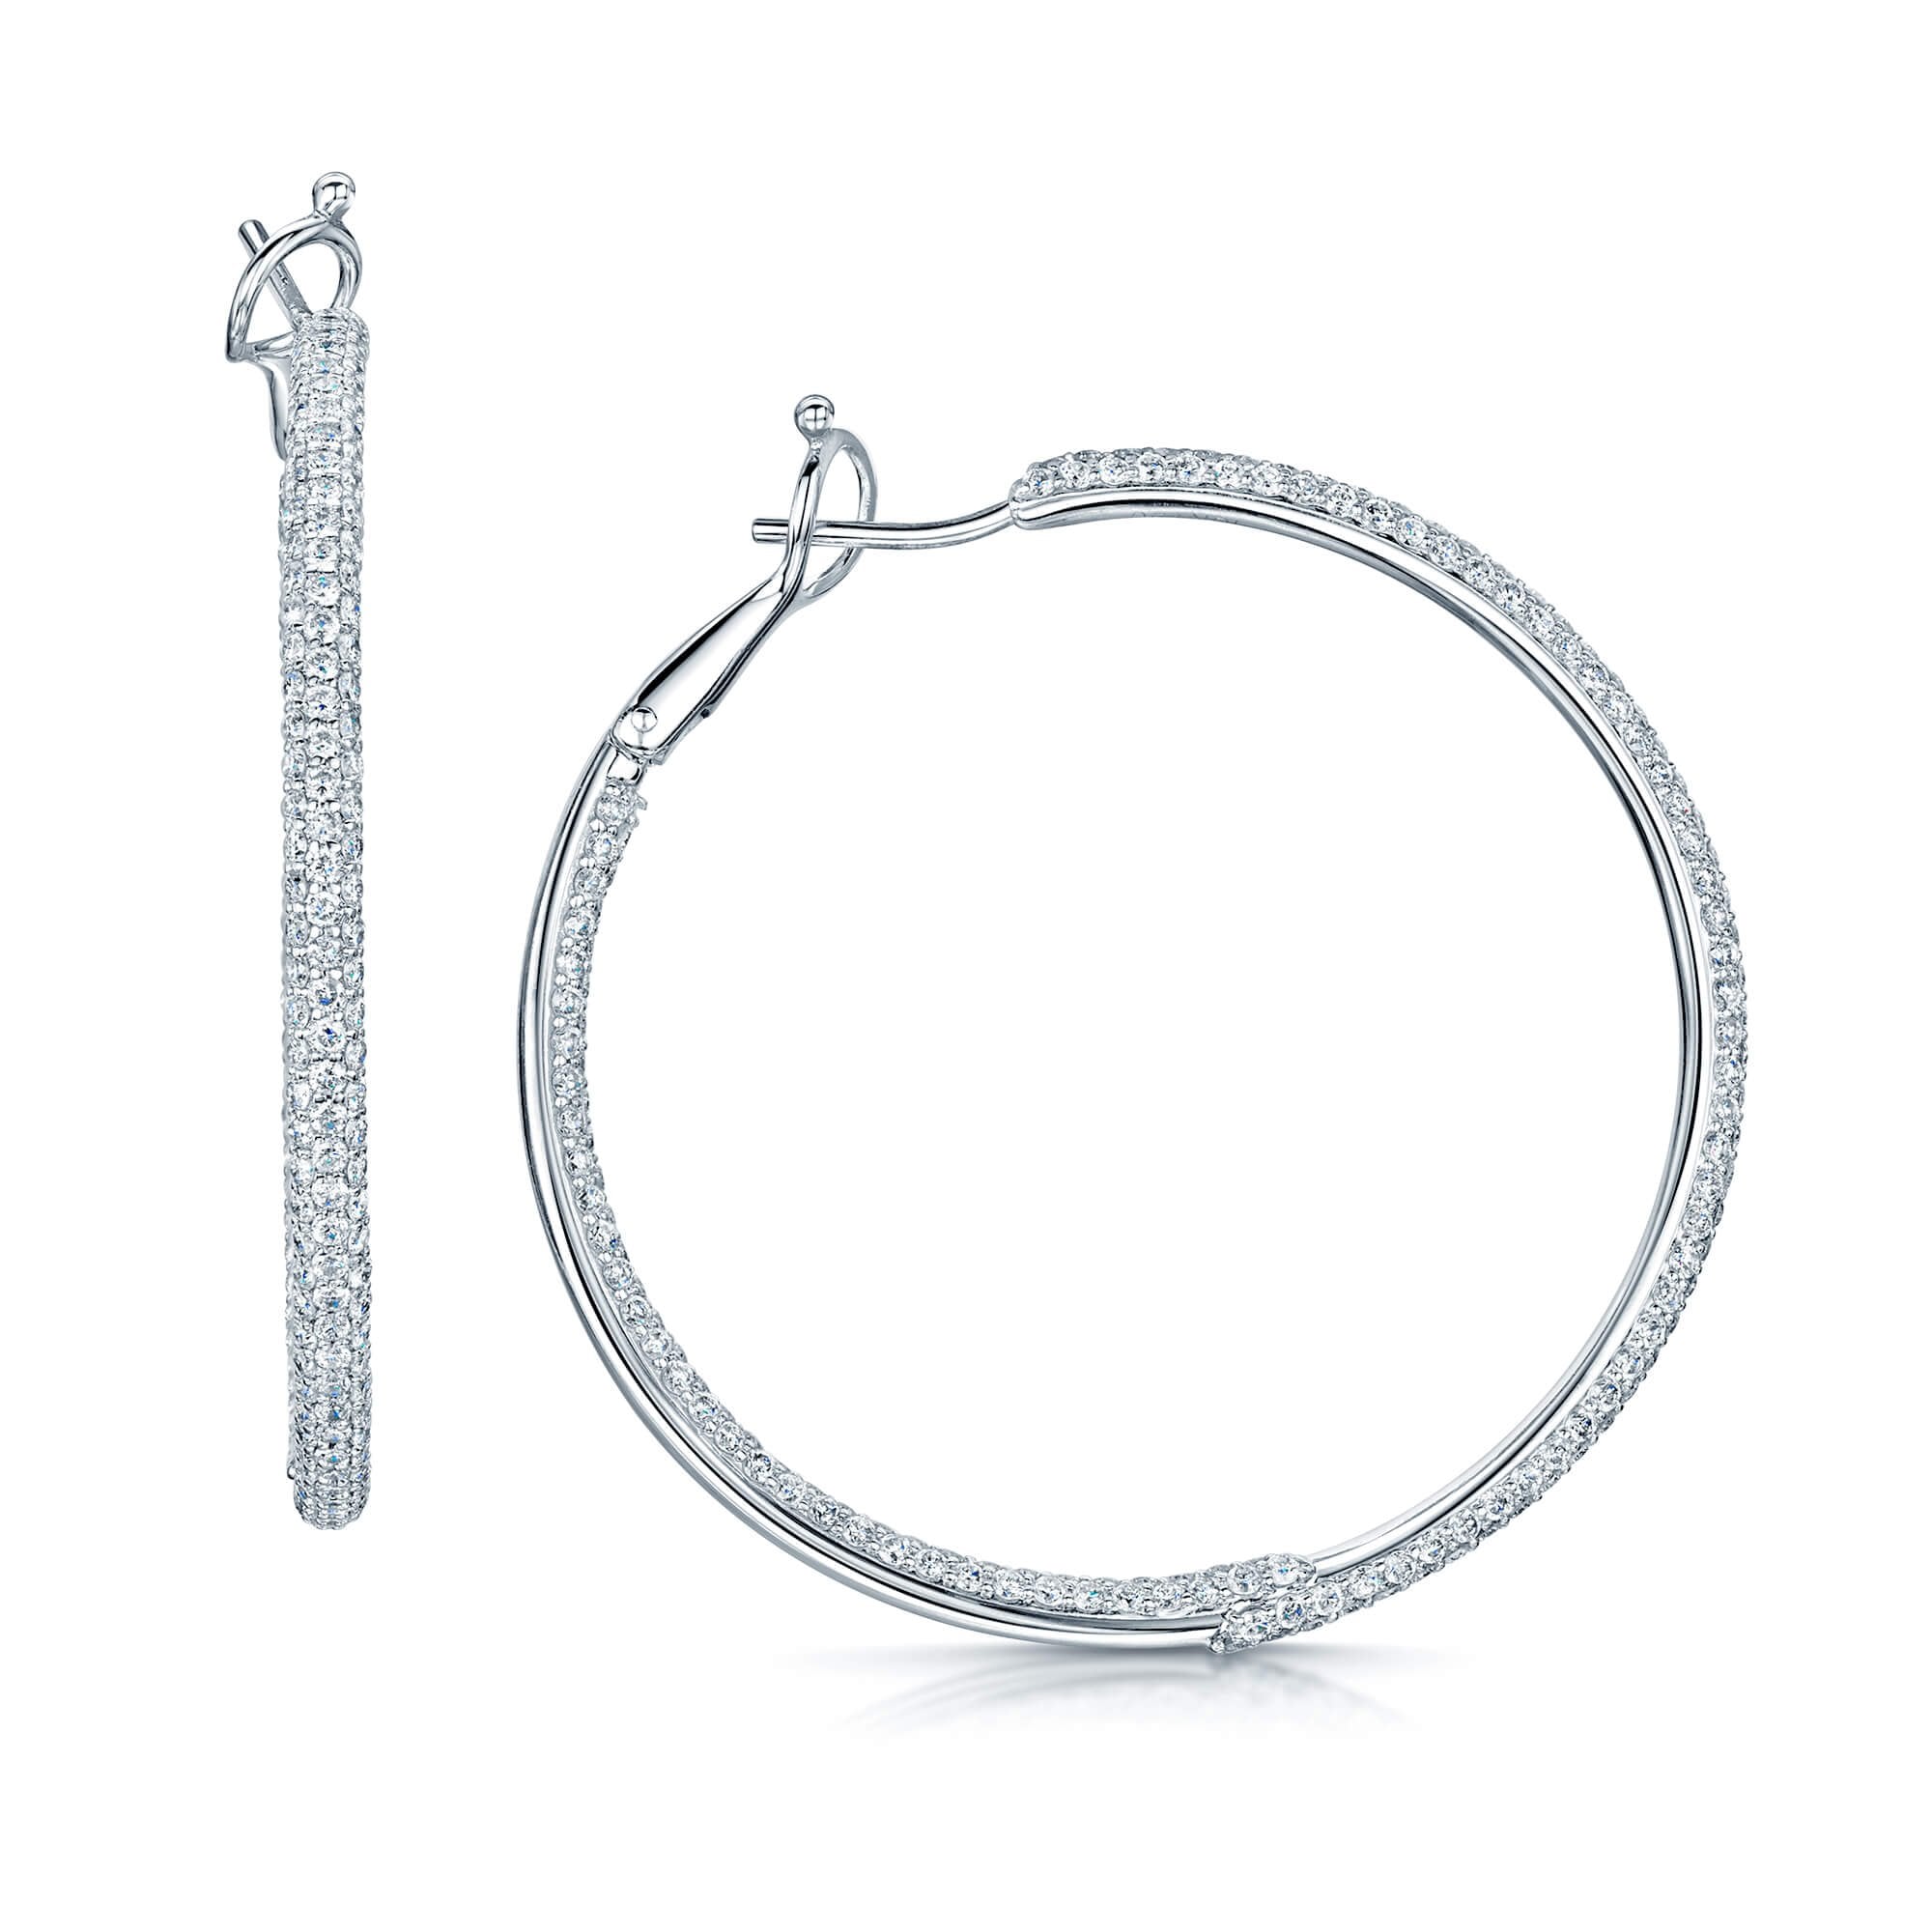 18ct White Gold Pave Diamond Large Hoops